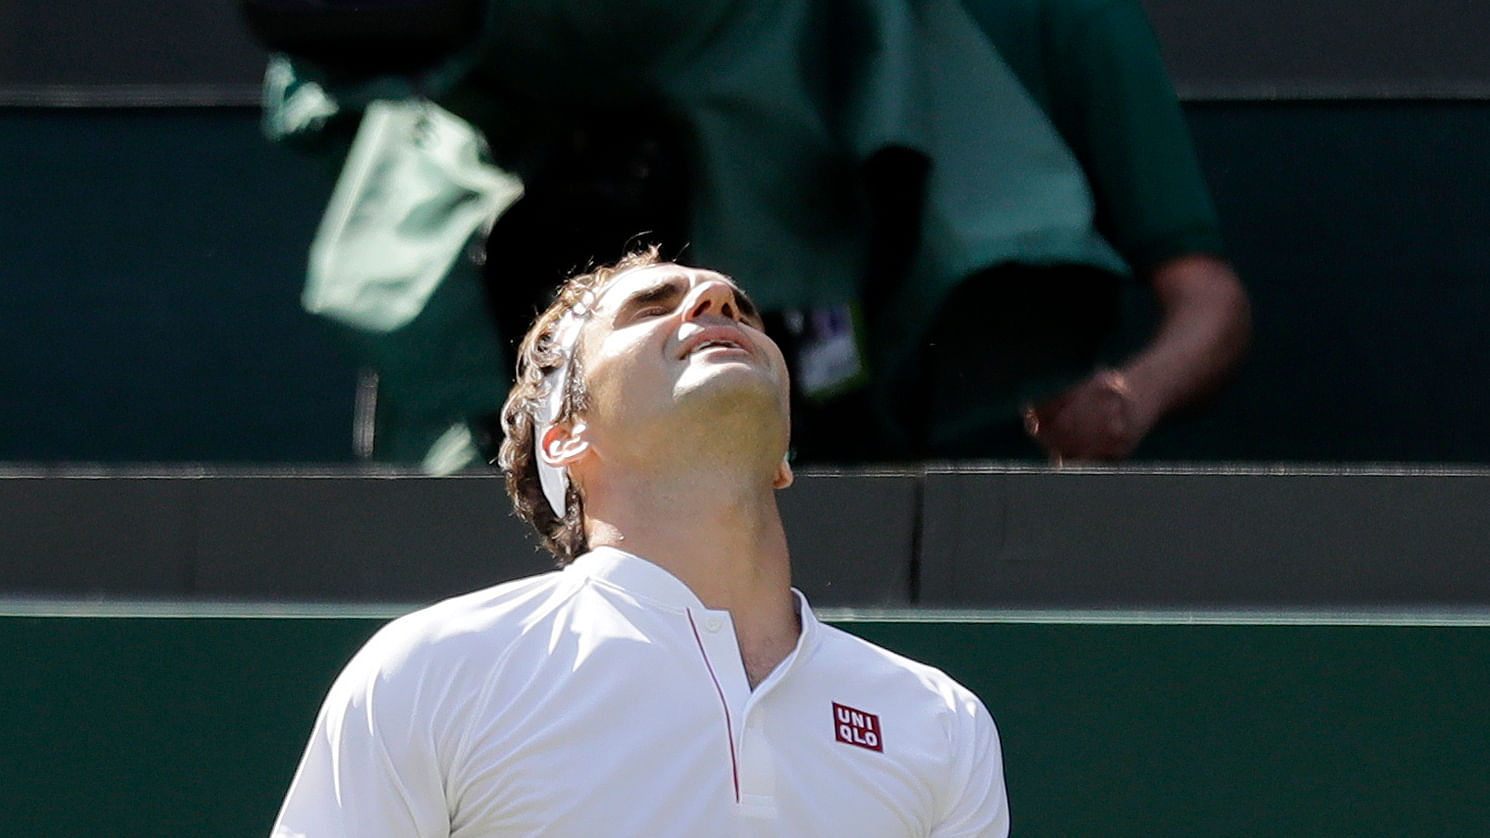 Roger Federer reacts after losing a point to Kevin Anderson during the Wimbledon quarter-final.